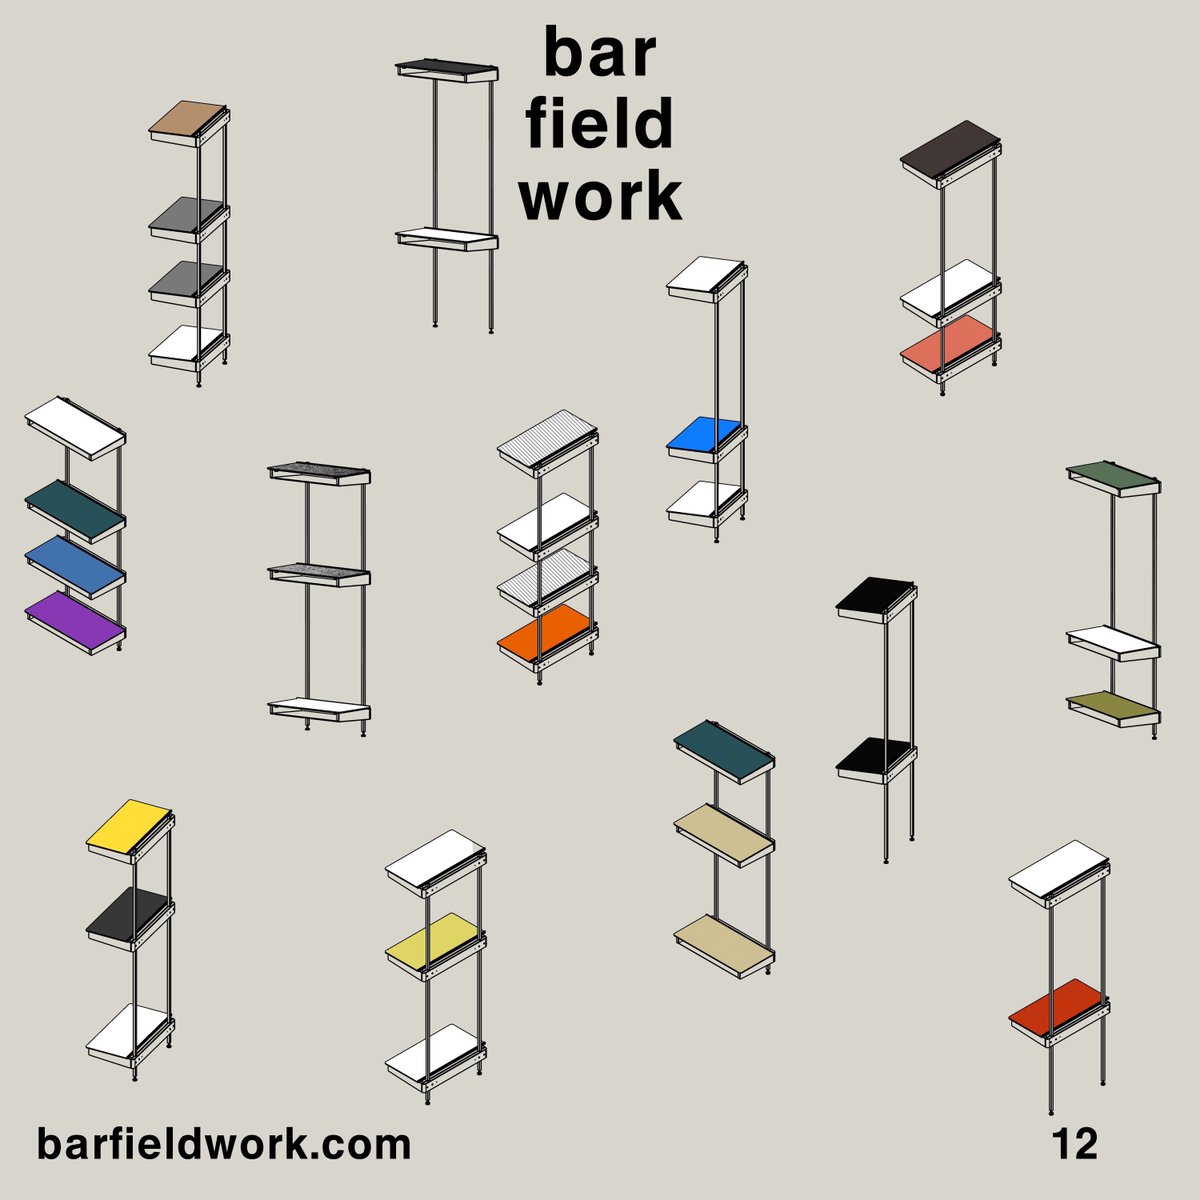 🌟 We are delighted to announce that Barfield Work is participating in the Workspace Design show London 27-28 February 2024. 🌟Have you registered yet? Get your free visitor pass now: rb.gy/3seei5 #WorkspaceDesignShow #London2024 #InnovativeFurniture #DesignRevolution